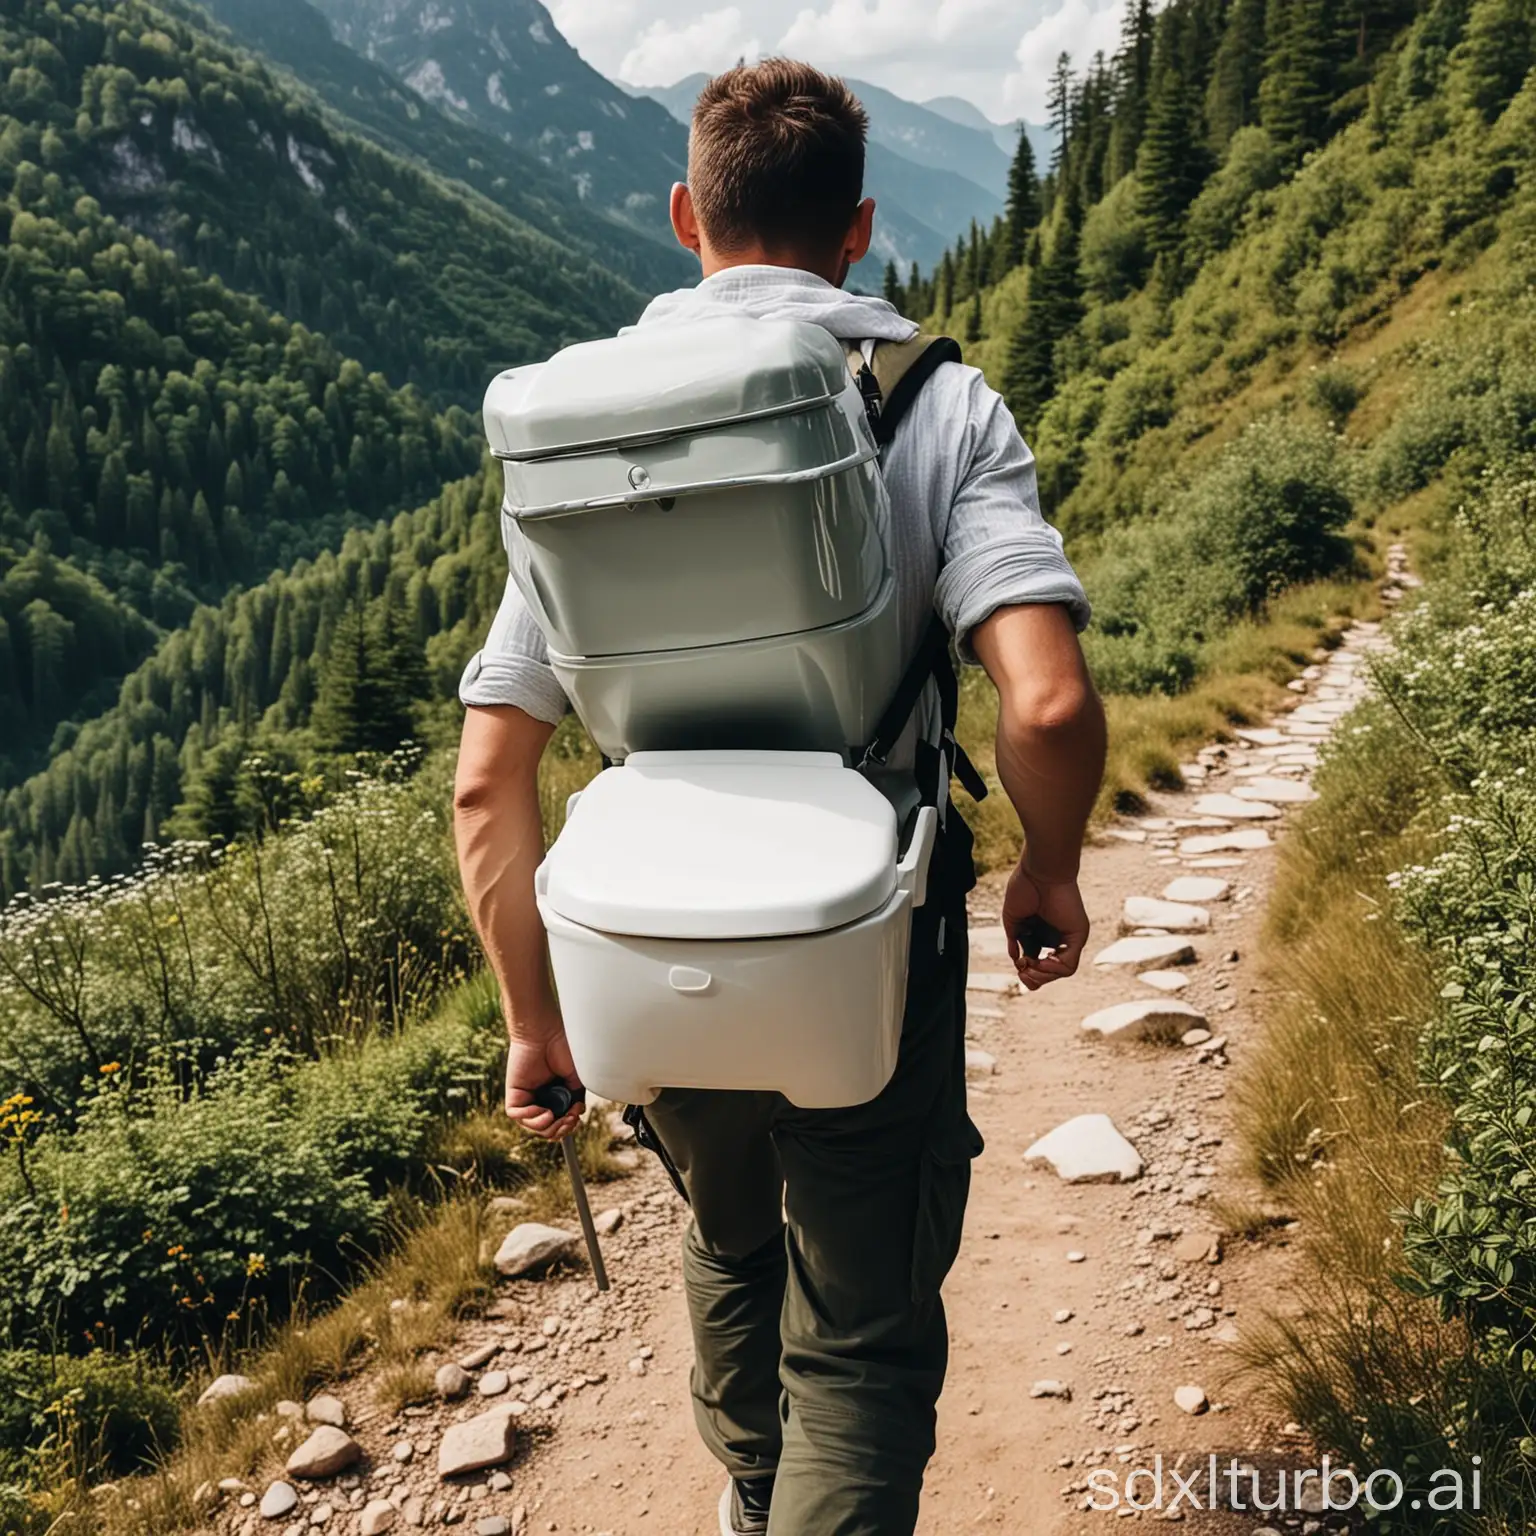 A man is going on a hike and carrying a white porcelain toilet on his back from home